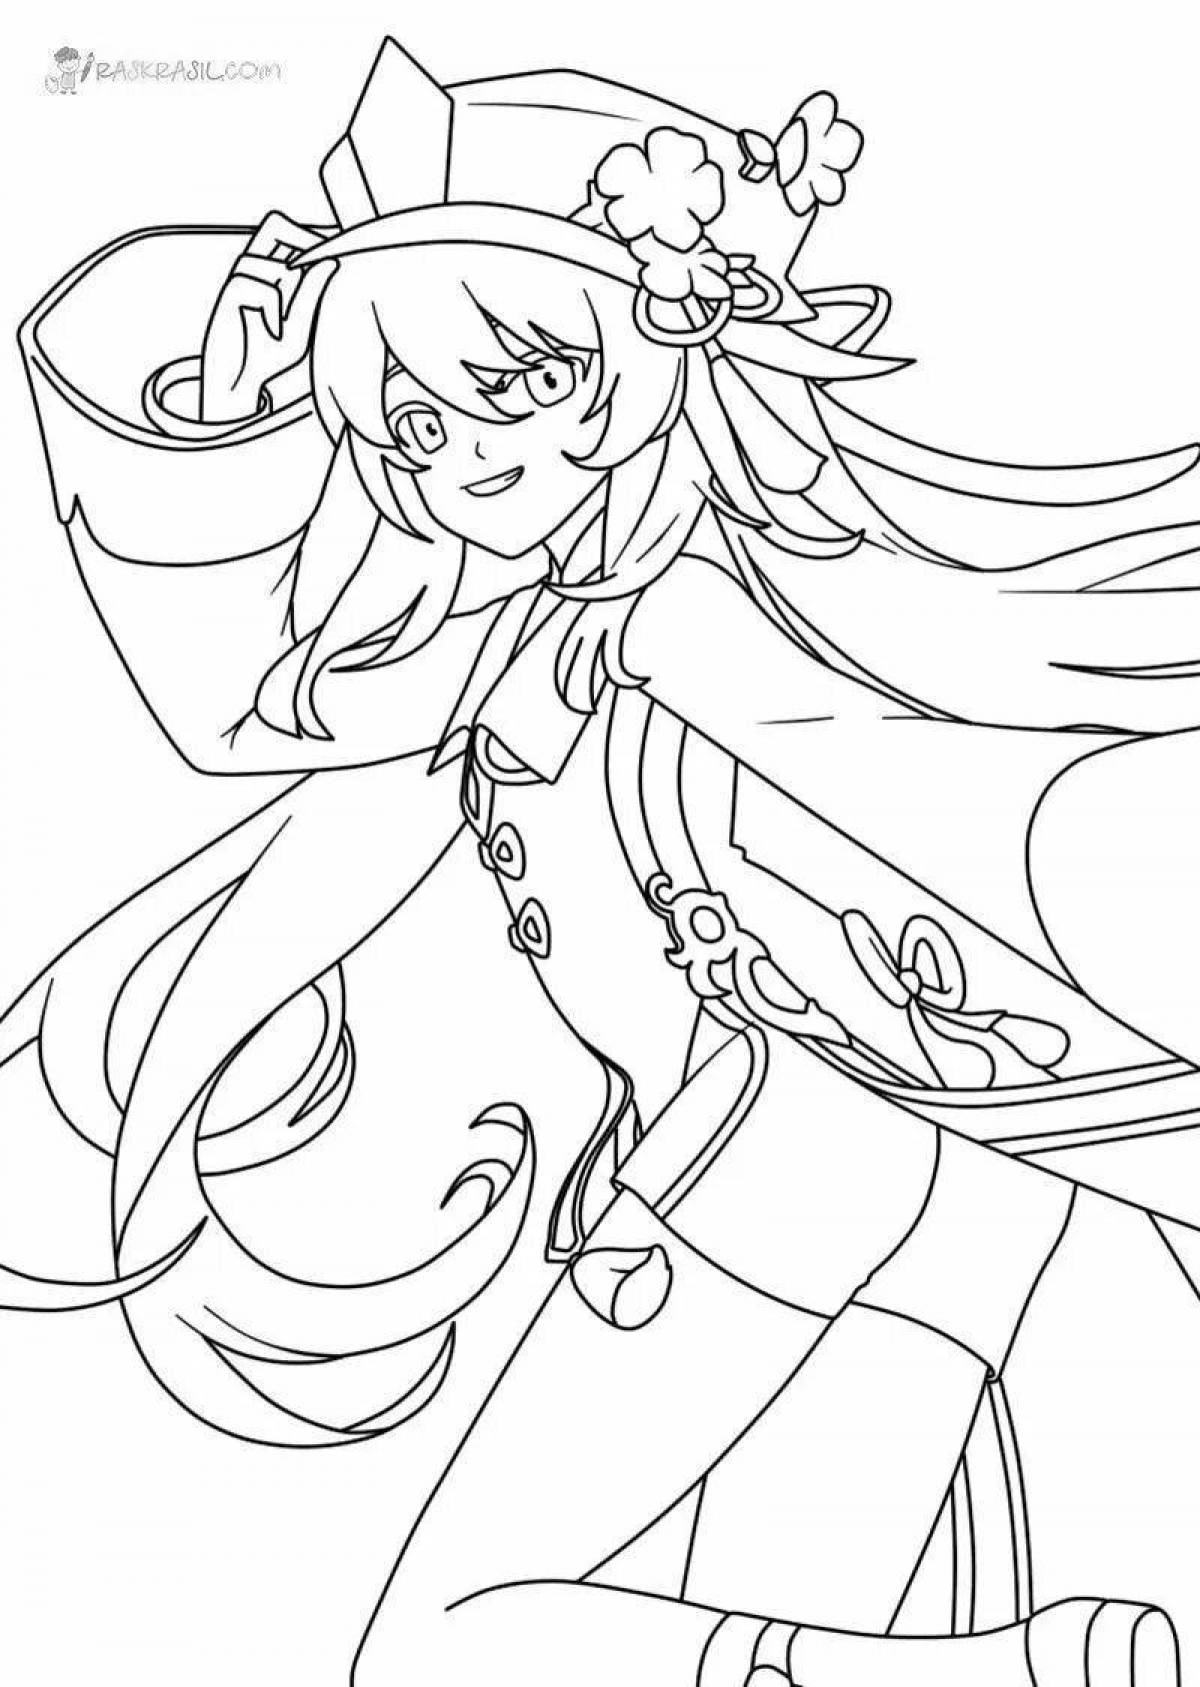 Charon adorable coloring page